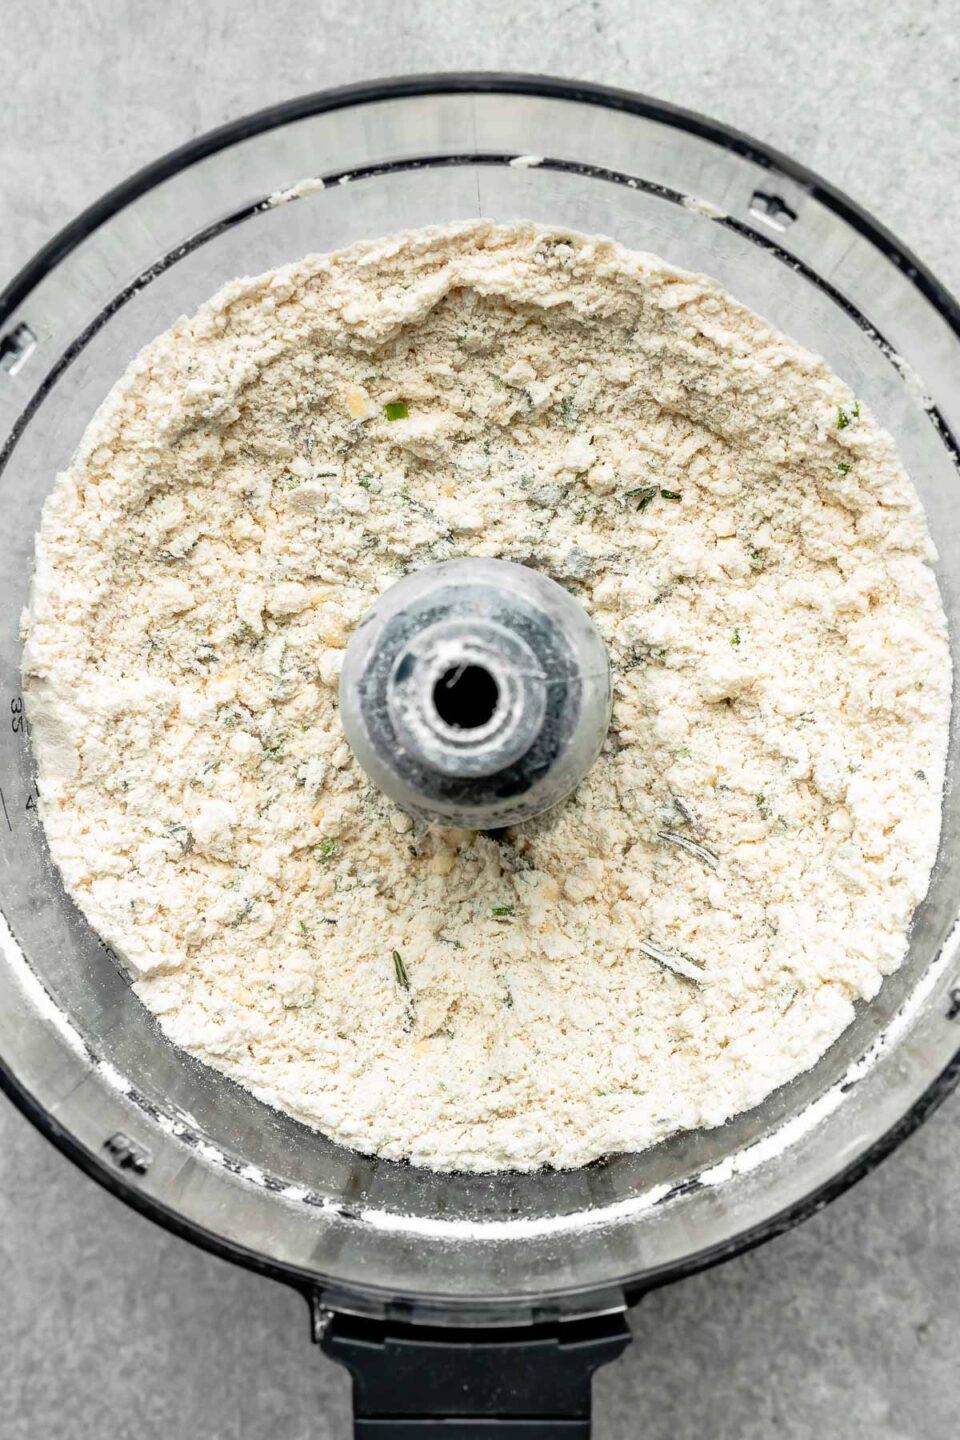 An overhead shot of dry pie crust ingredients in a food processor atop a grey textured surface.